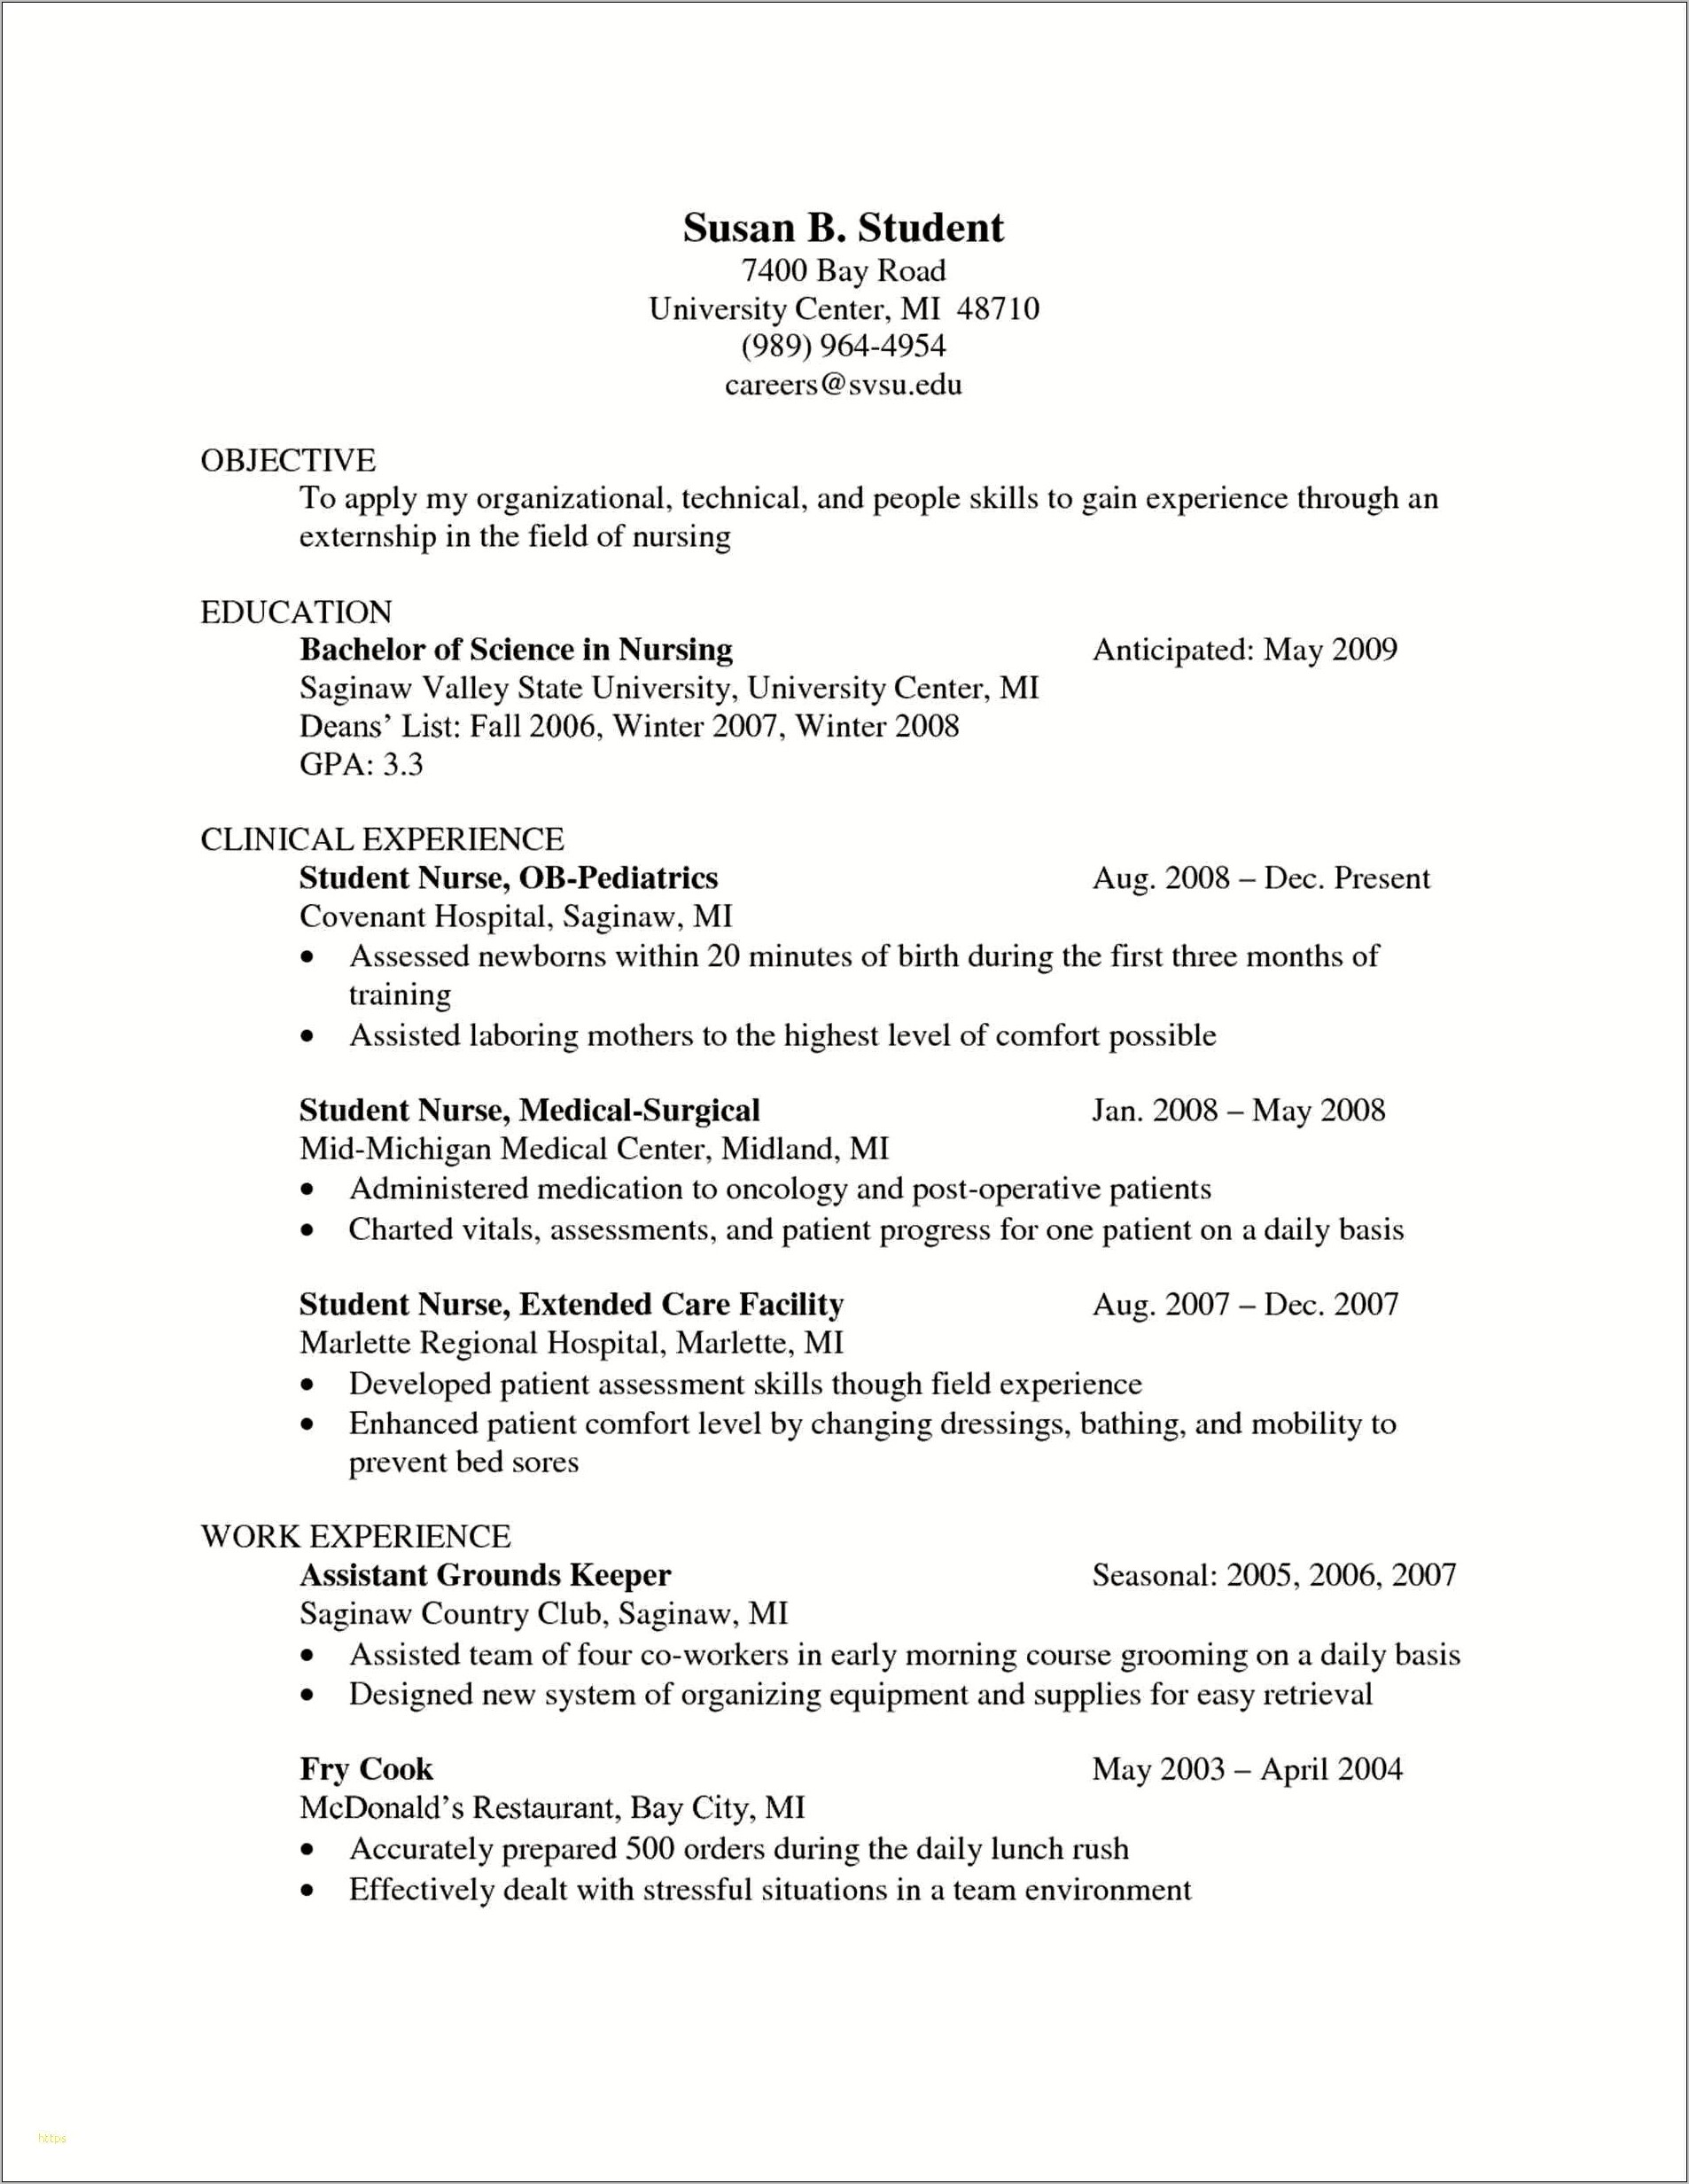 Resume Objective For Student Nurse